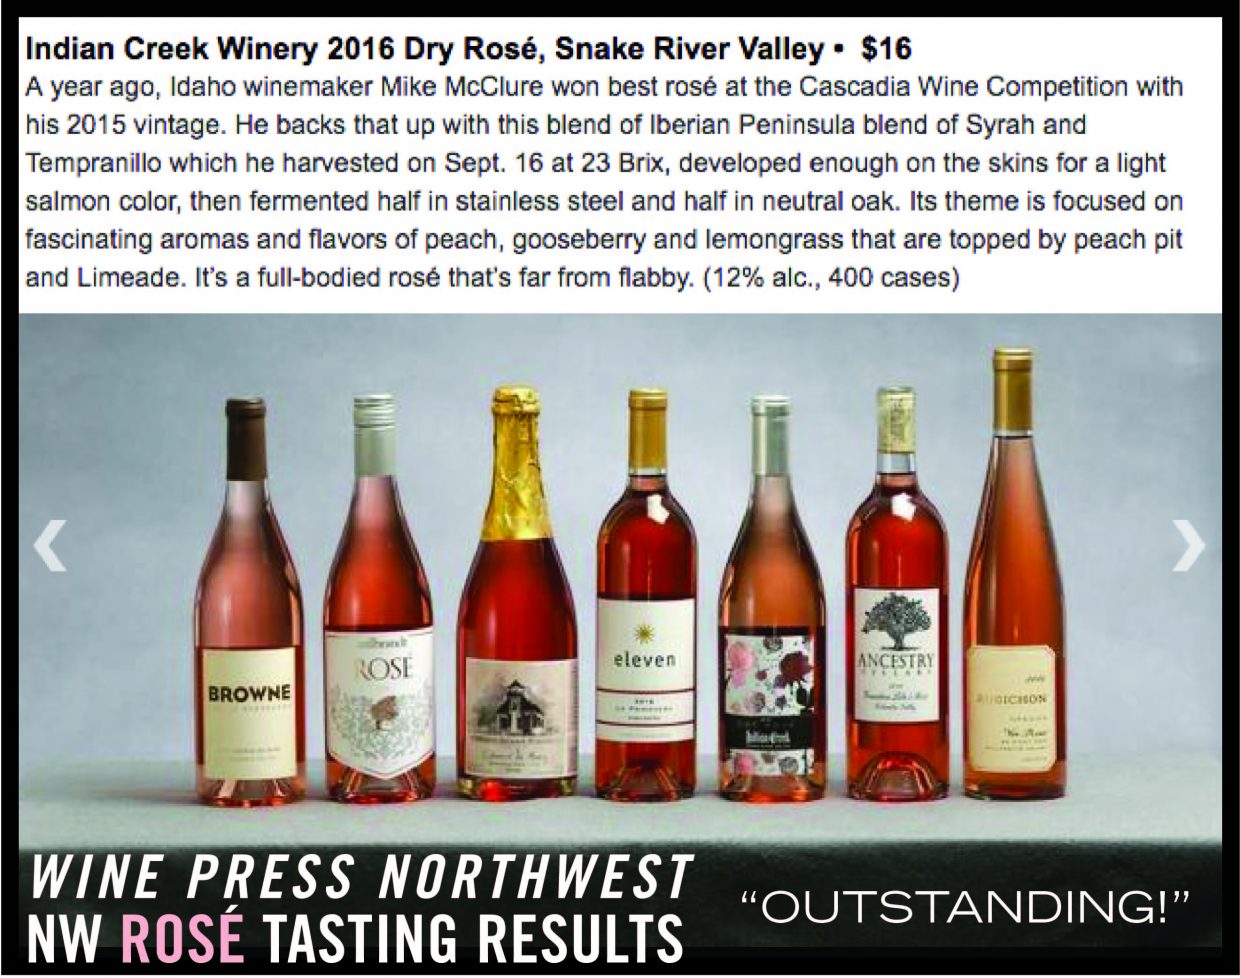 Our Rosé gets highest rating and Top 30 in Wine Press Northwest